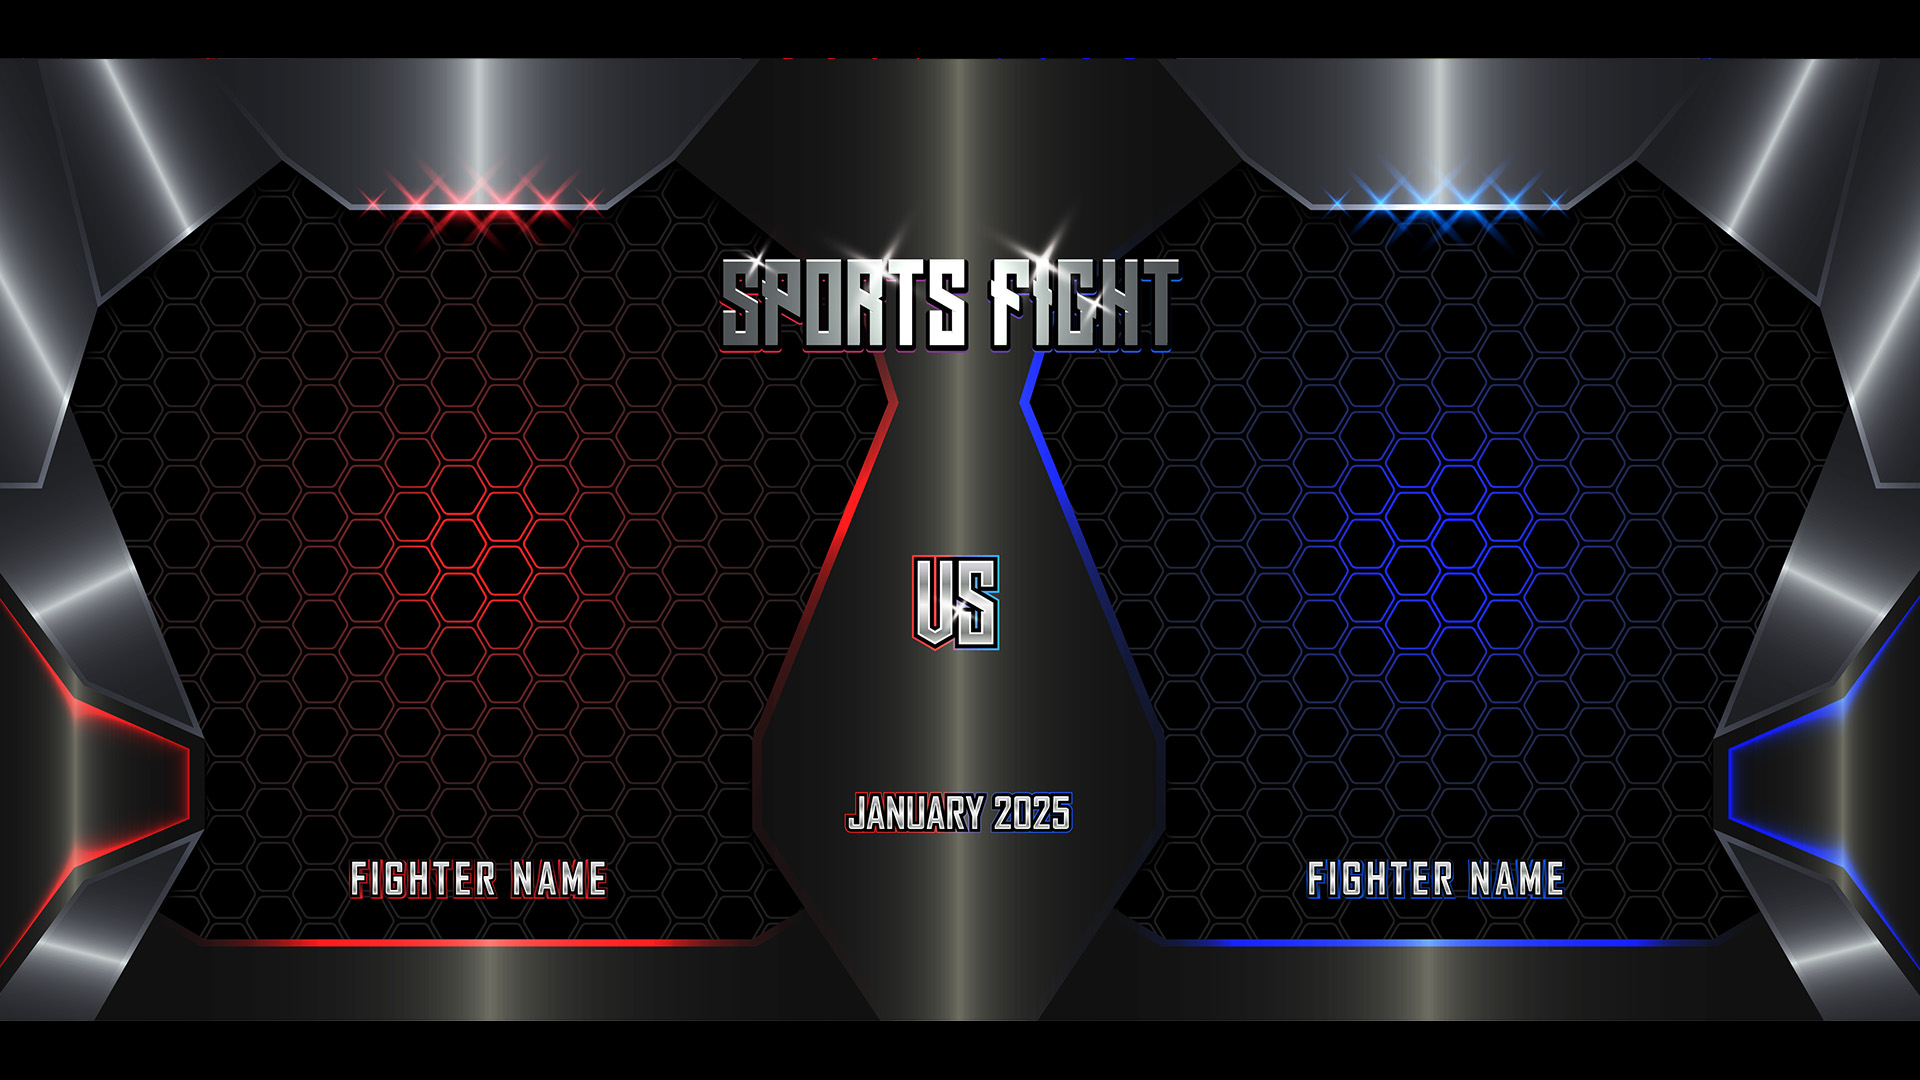 10 Sports Fight Posters and Backgrounds in 3D Realistic Style.